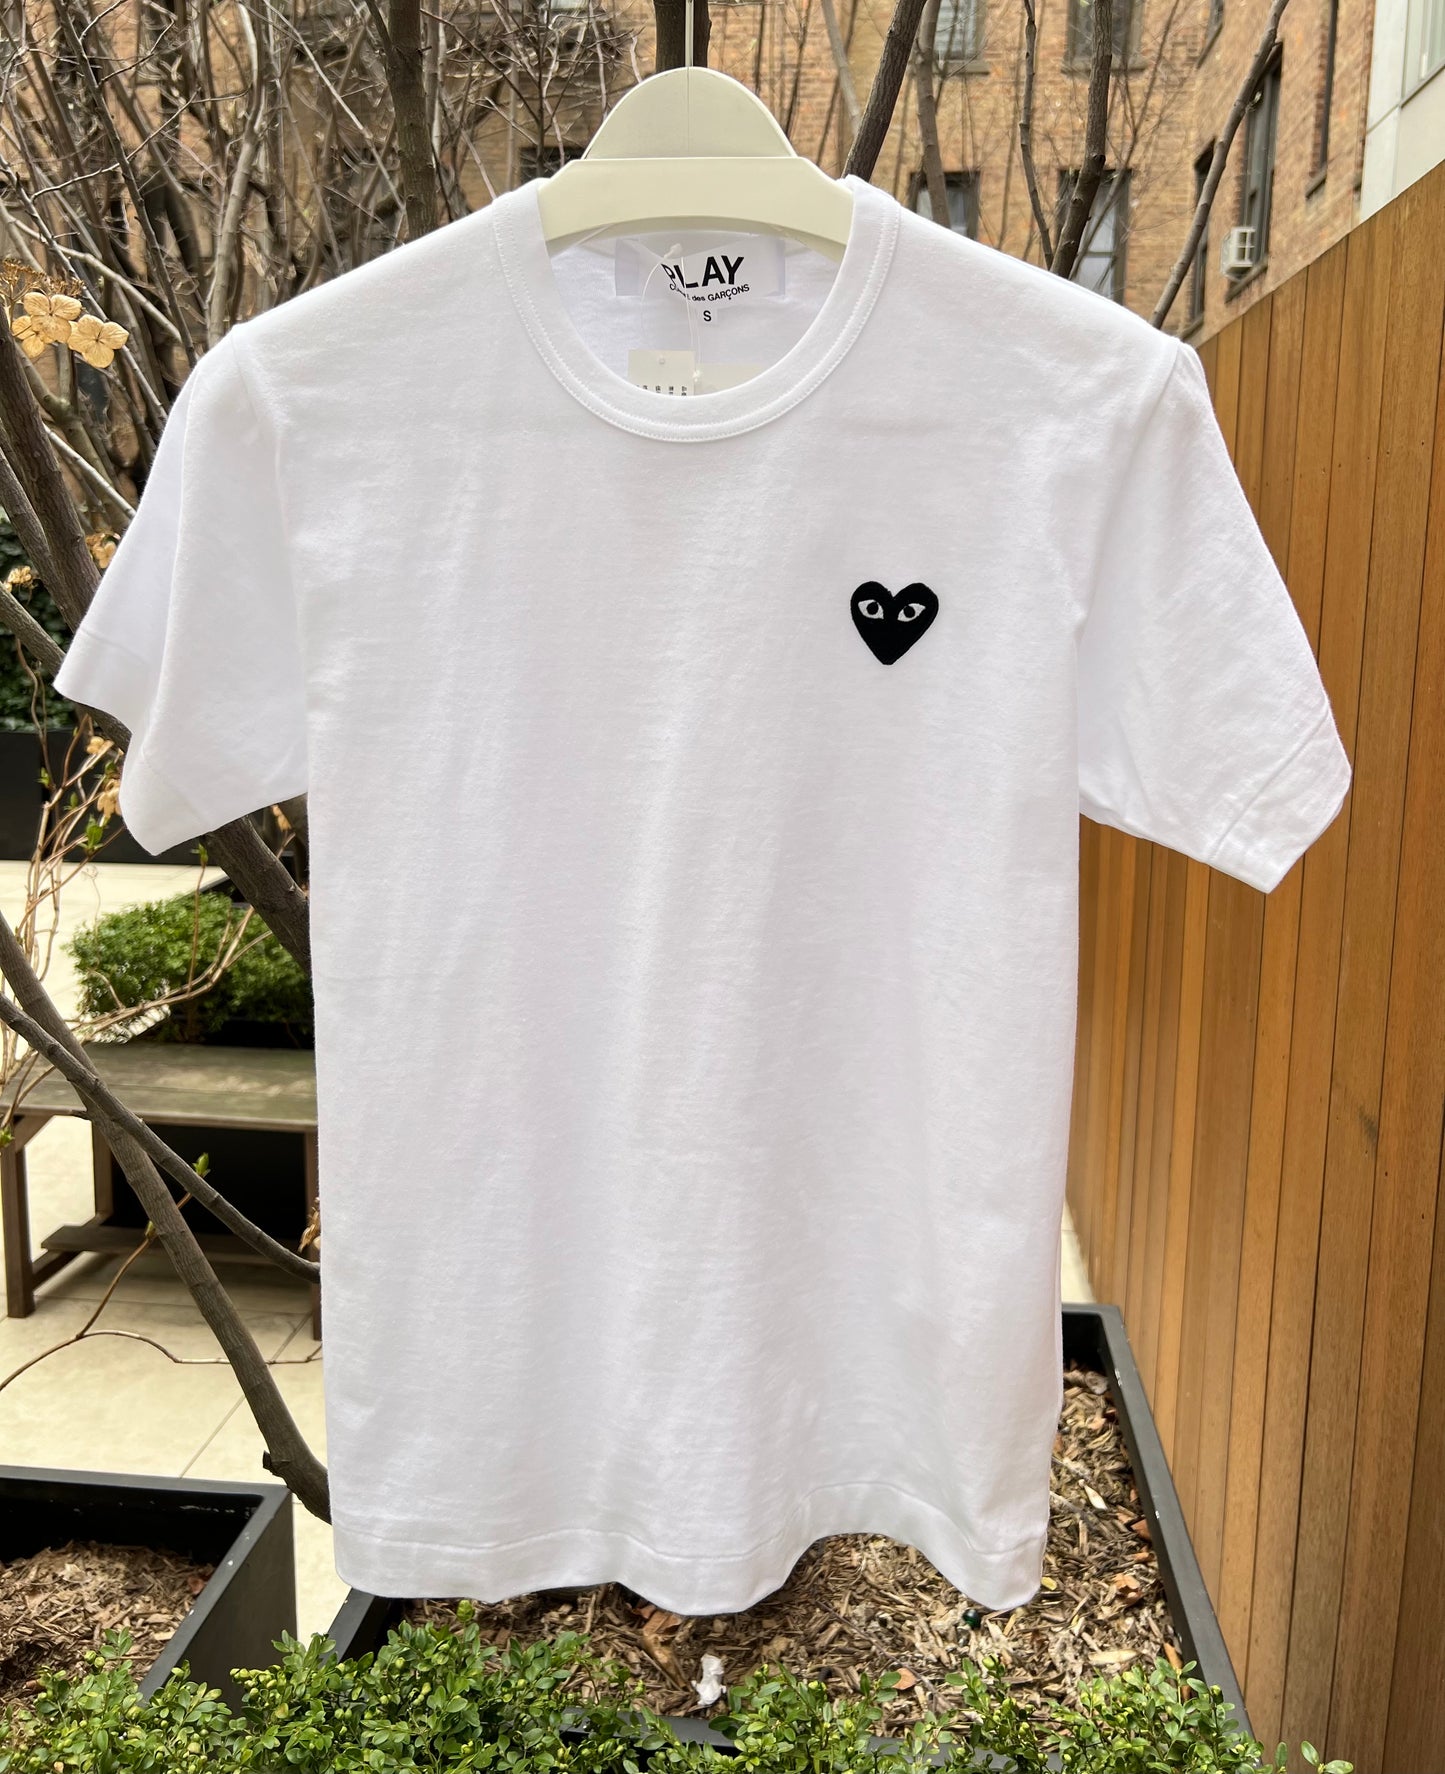 A white COMME DES GARCONS P1T064 PLAY T-SHIRT BLACK HEART hanging on a clothes hanger outdoors.